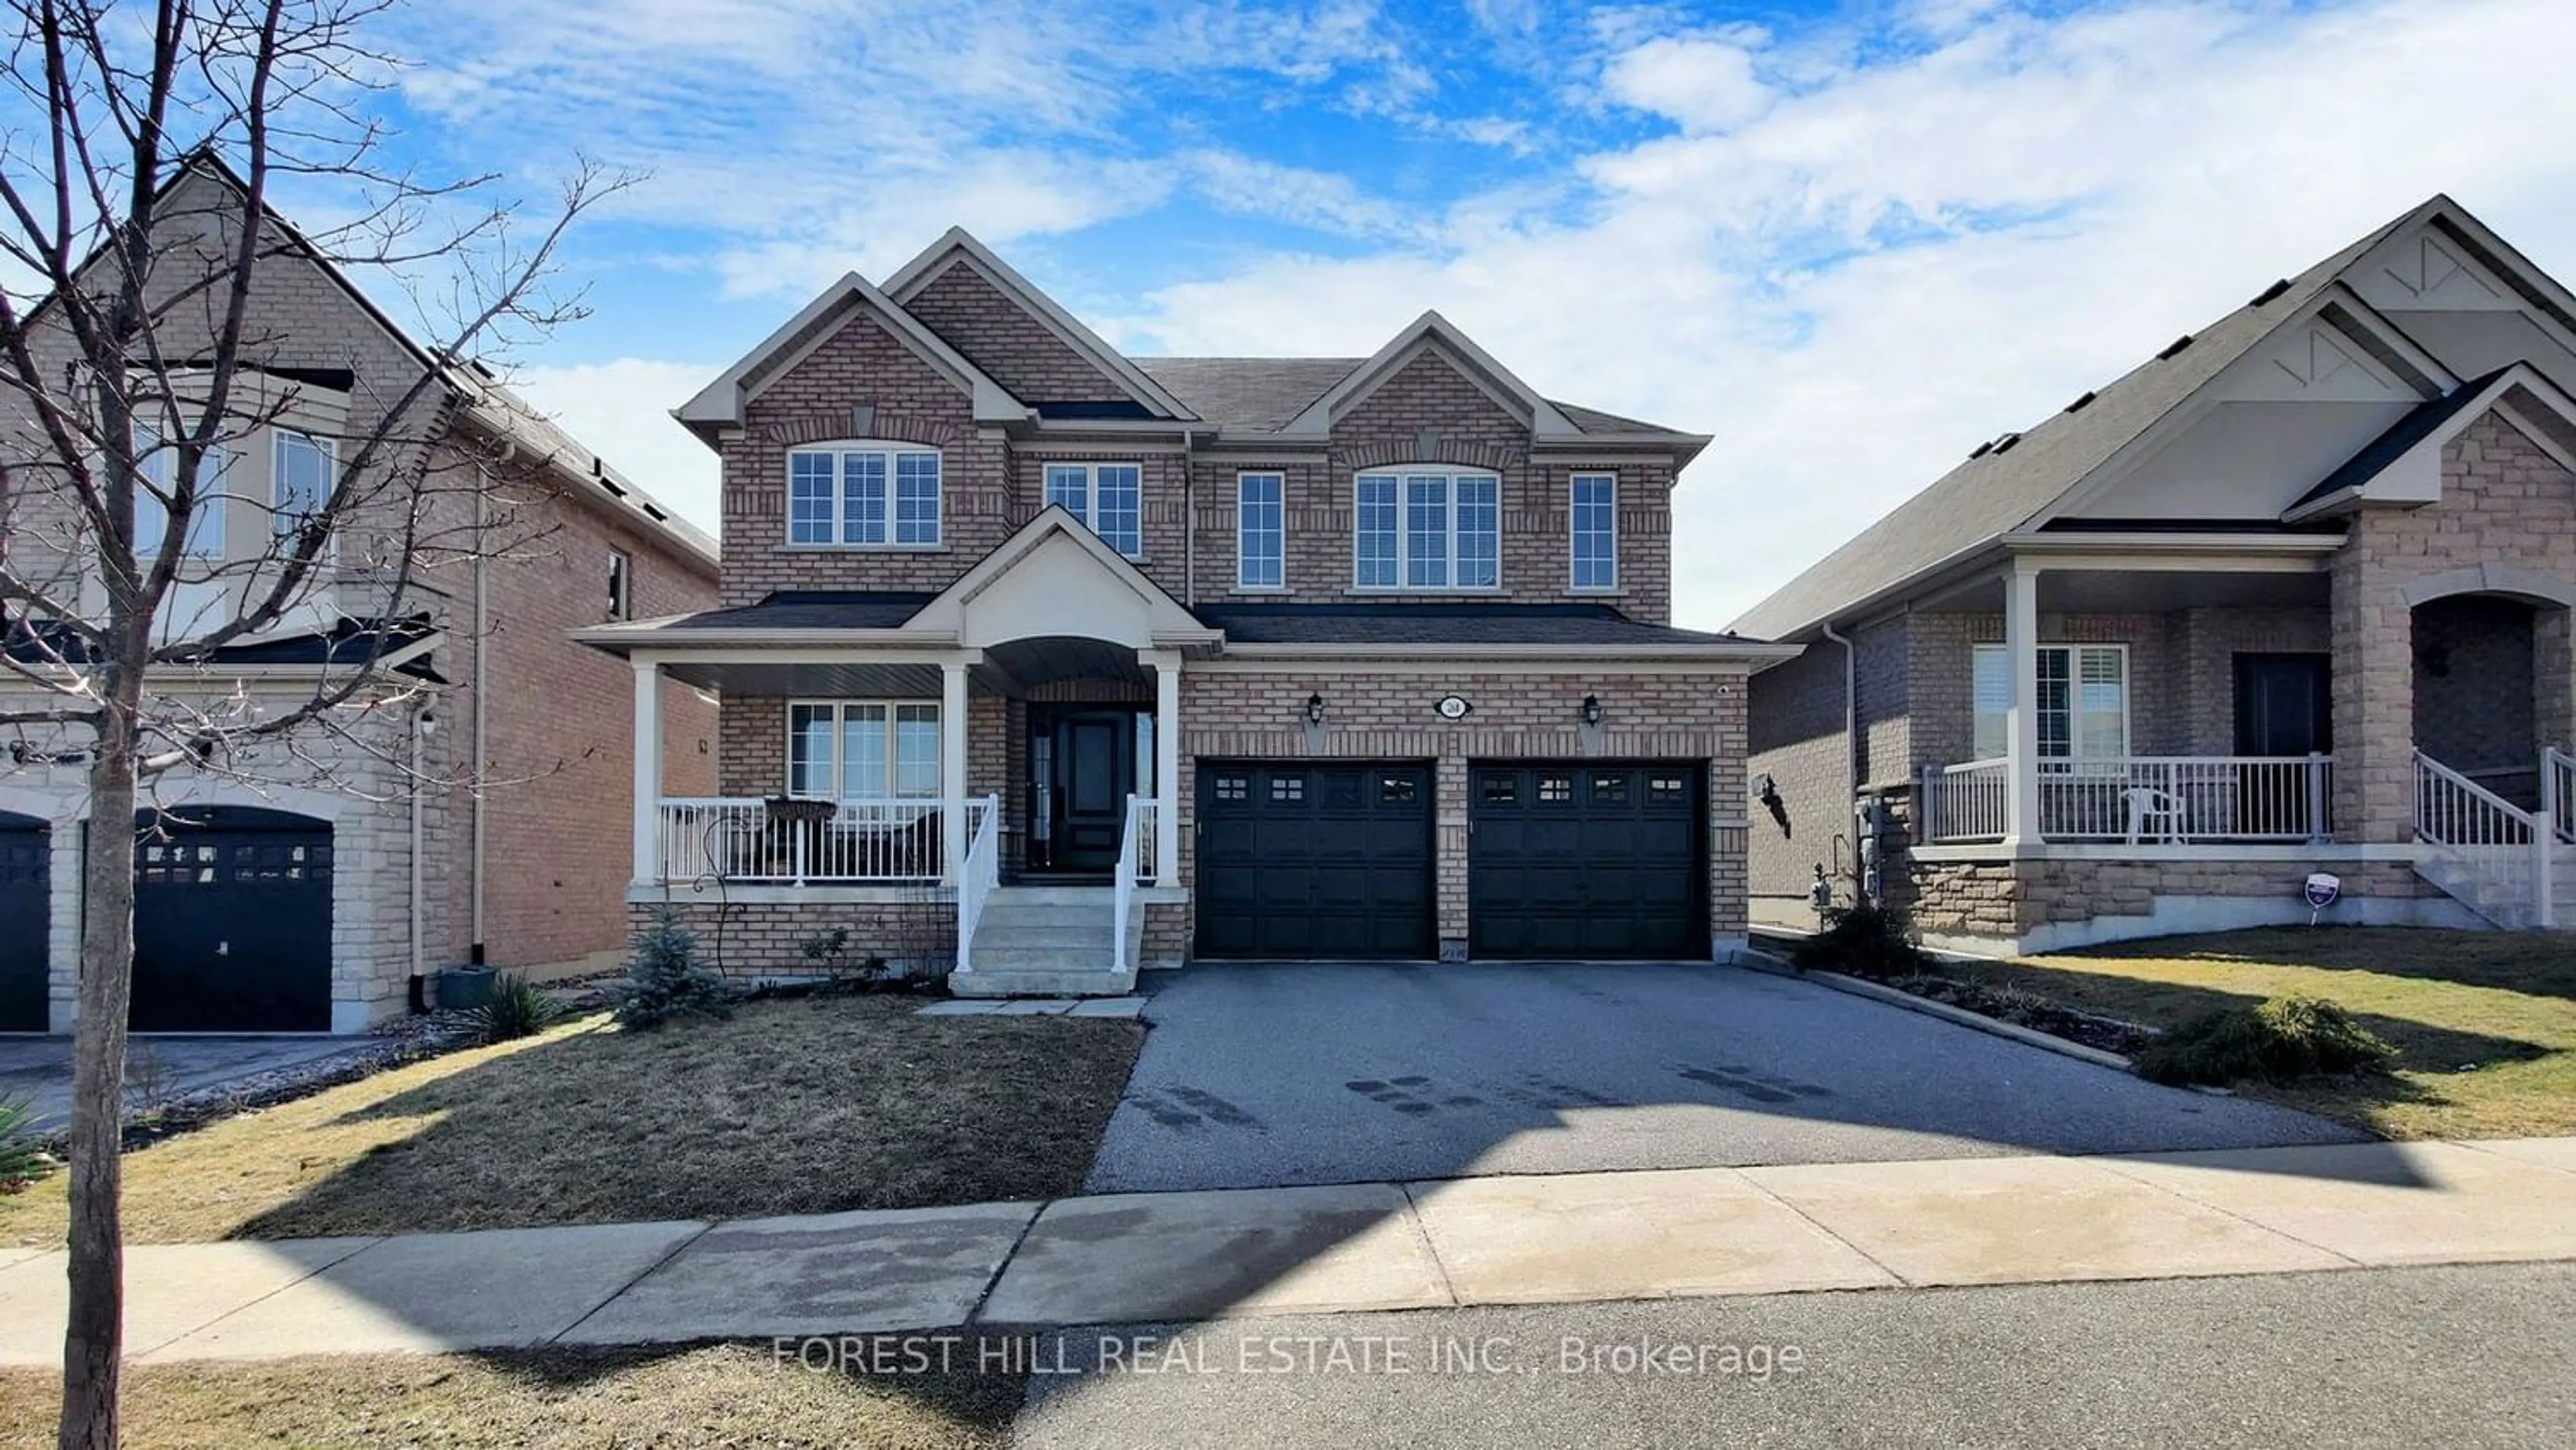 Home with brick exterior material for 268 Carrier Cres, Vaughan Ontario L6A 4T4